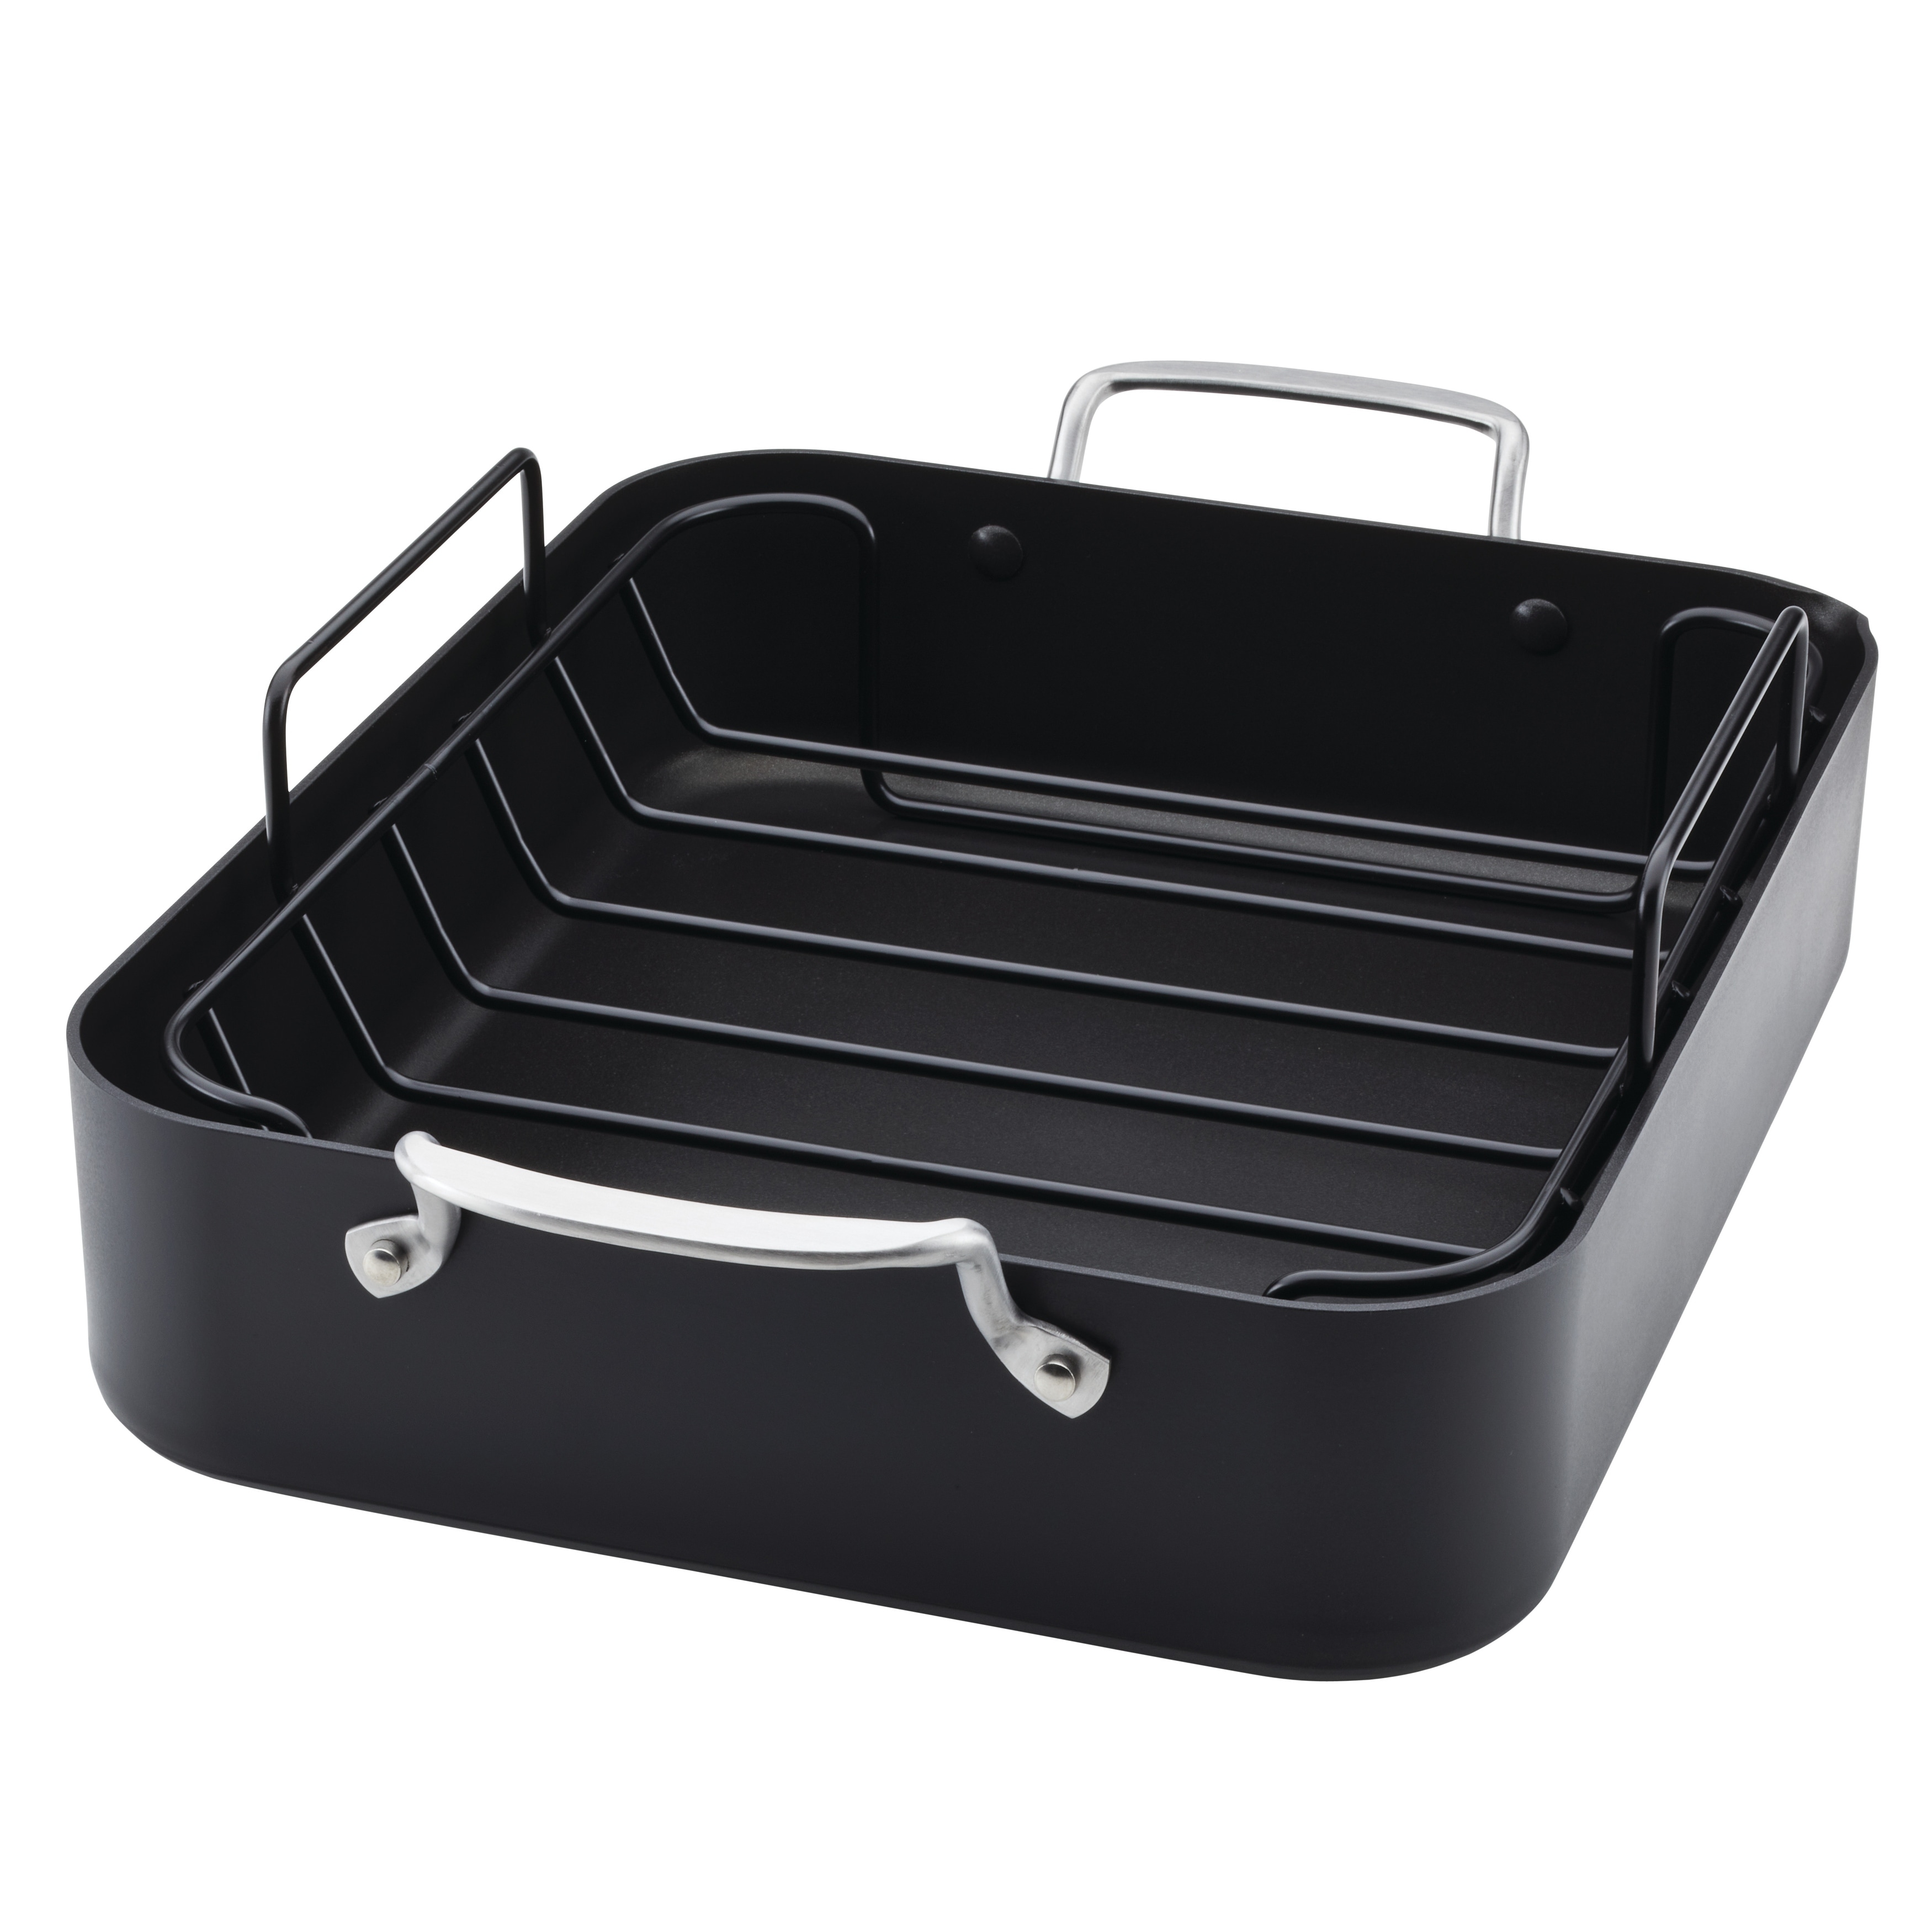 https://ak1.ostkcdn.com/images/products/is/images/direct/a40752ed8fcec48f06fc48b225e4d0231b1856f9/KitchenAid-Hard-Anodized-Roaster-with-Removable-Nonstick-Rack%2C-13-Inch-x-15.75-Inch%2C-Matte-Black.jpg